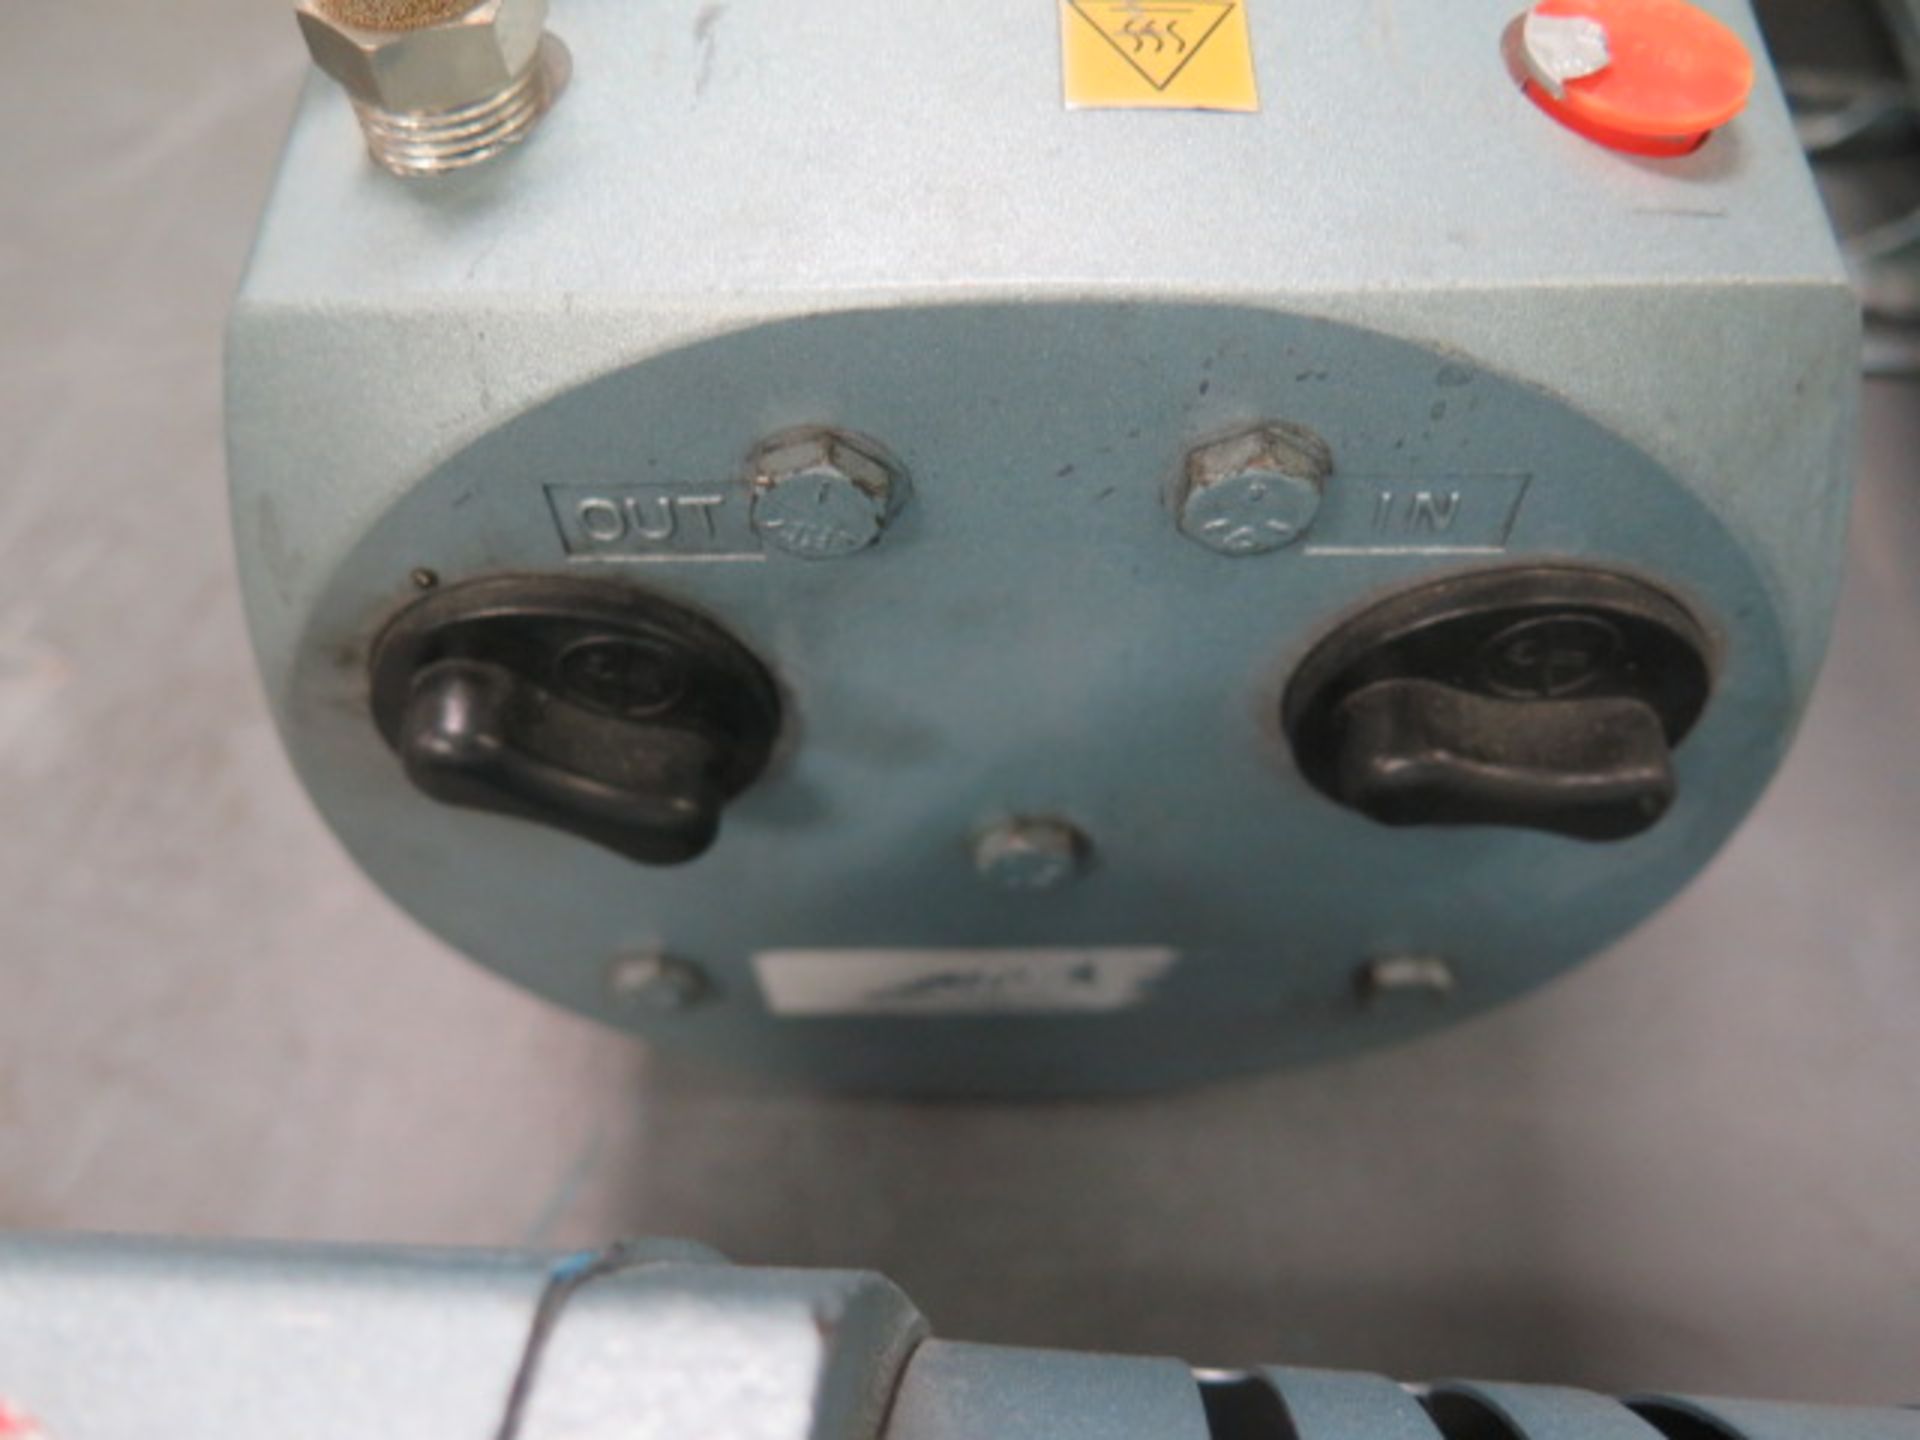 Gast mdl. 1023-101Q-G279 Vacuum Pumps (3) 3/4Hp 208-230/380-460V (SOLD AS-IS - NO WARRANTY) - Image 3 of 5